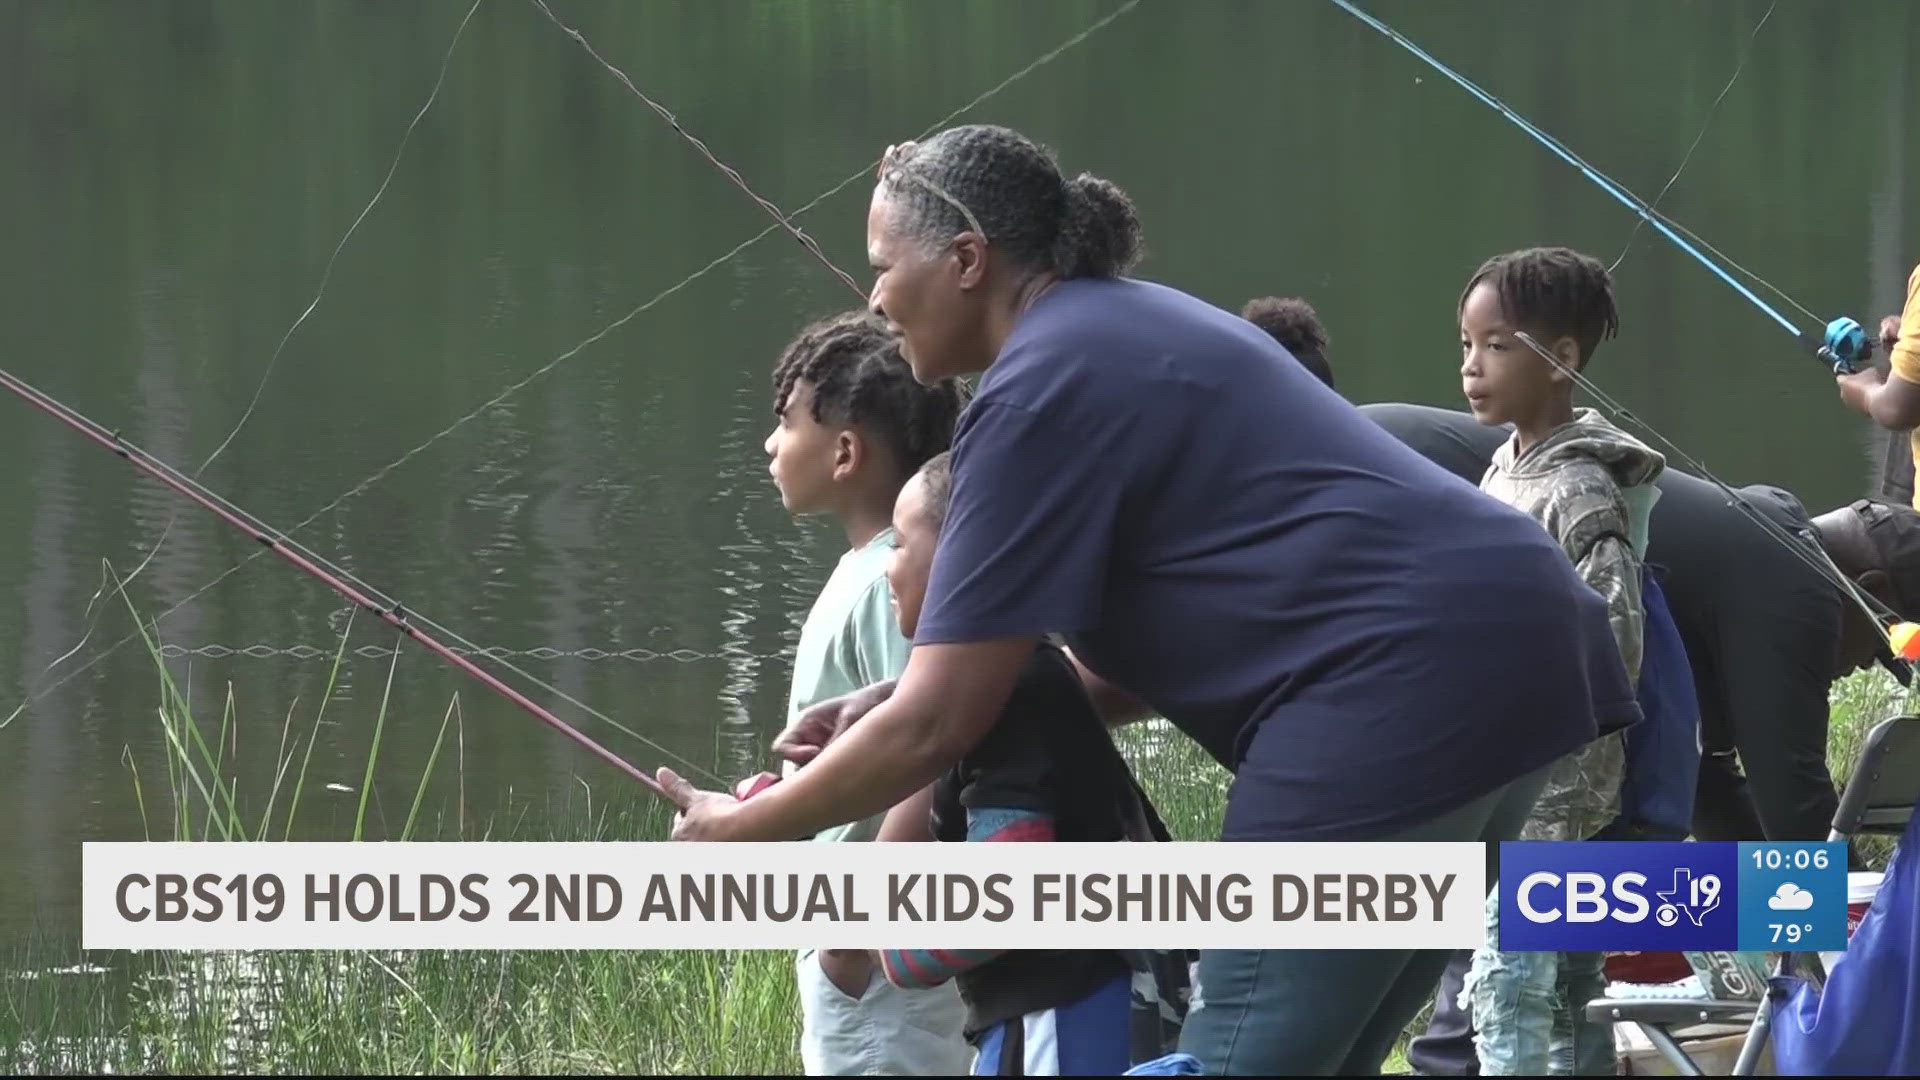 2nd annual CBS19 Urban Kids Fishing Derby brings families together for outdoor fun